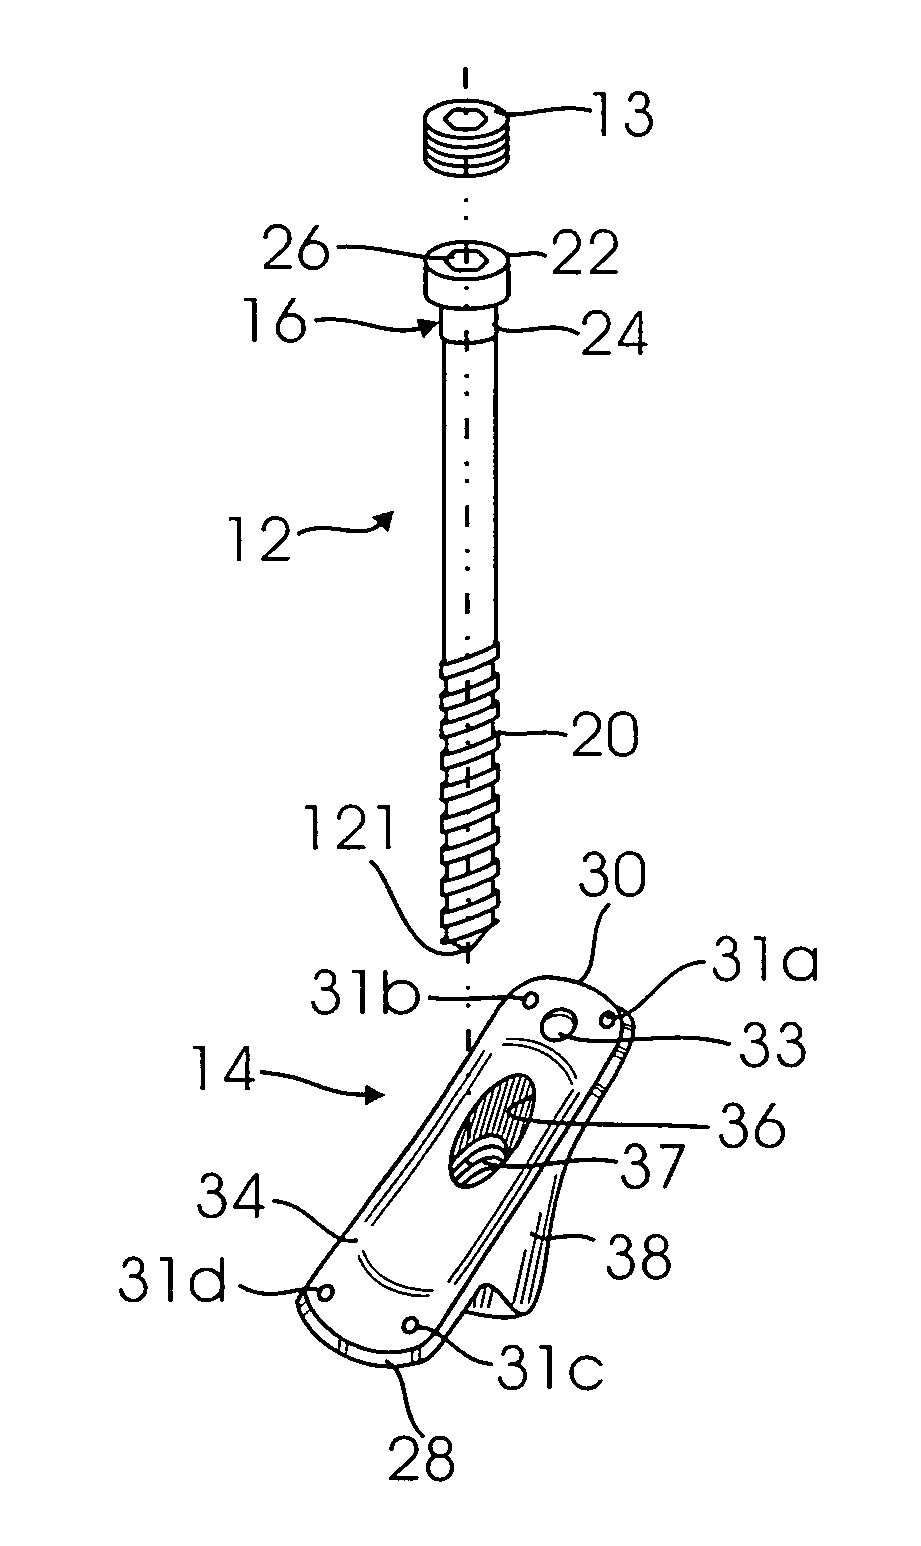 Odd angle internal bone fixation device for use in a transverse fracture of a humerus